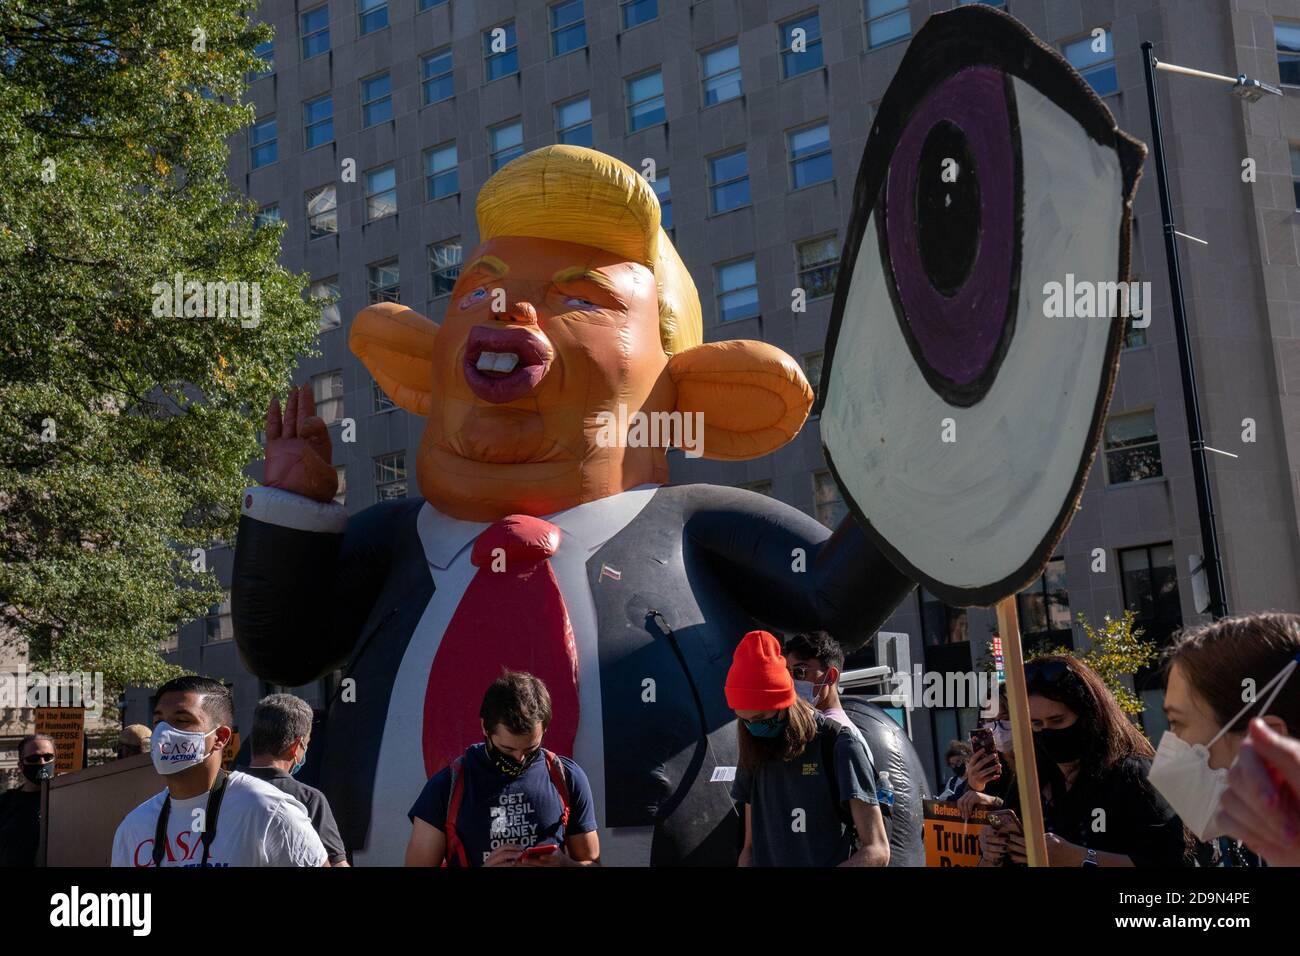 Washington, United States. 06th Nov, 2020. A balloon in the likeness of President Donald Trump is in the background during an 'Every Vote Counts' march from McPherson Square BLM Plaza next to Lafayette Park bordering the White House in Washington, DC on Friday, November 6, 2020. Democratic presidential candidate Joe Biden and President Donald Trump are locked in a tight presidential race. Photo by Ken Cedeno/UPI Credit: UPI/Alamy Live News Stock Photo